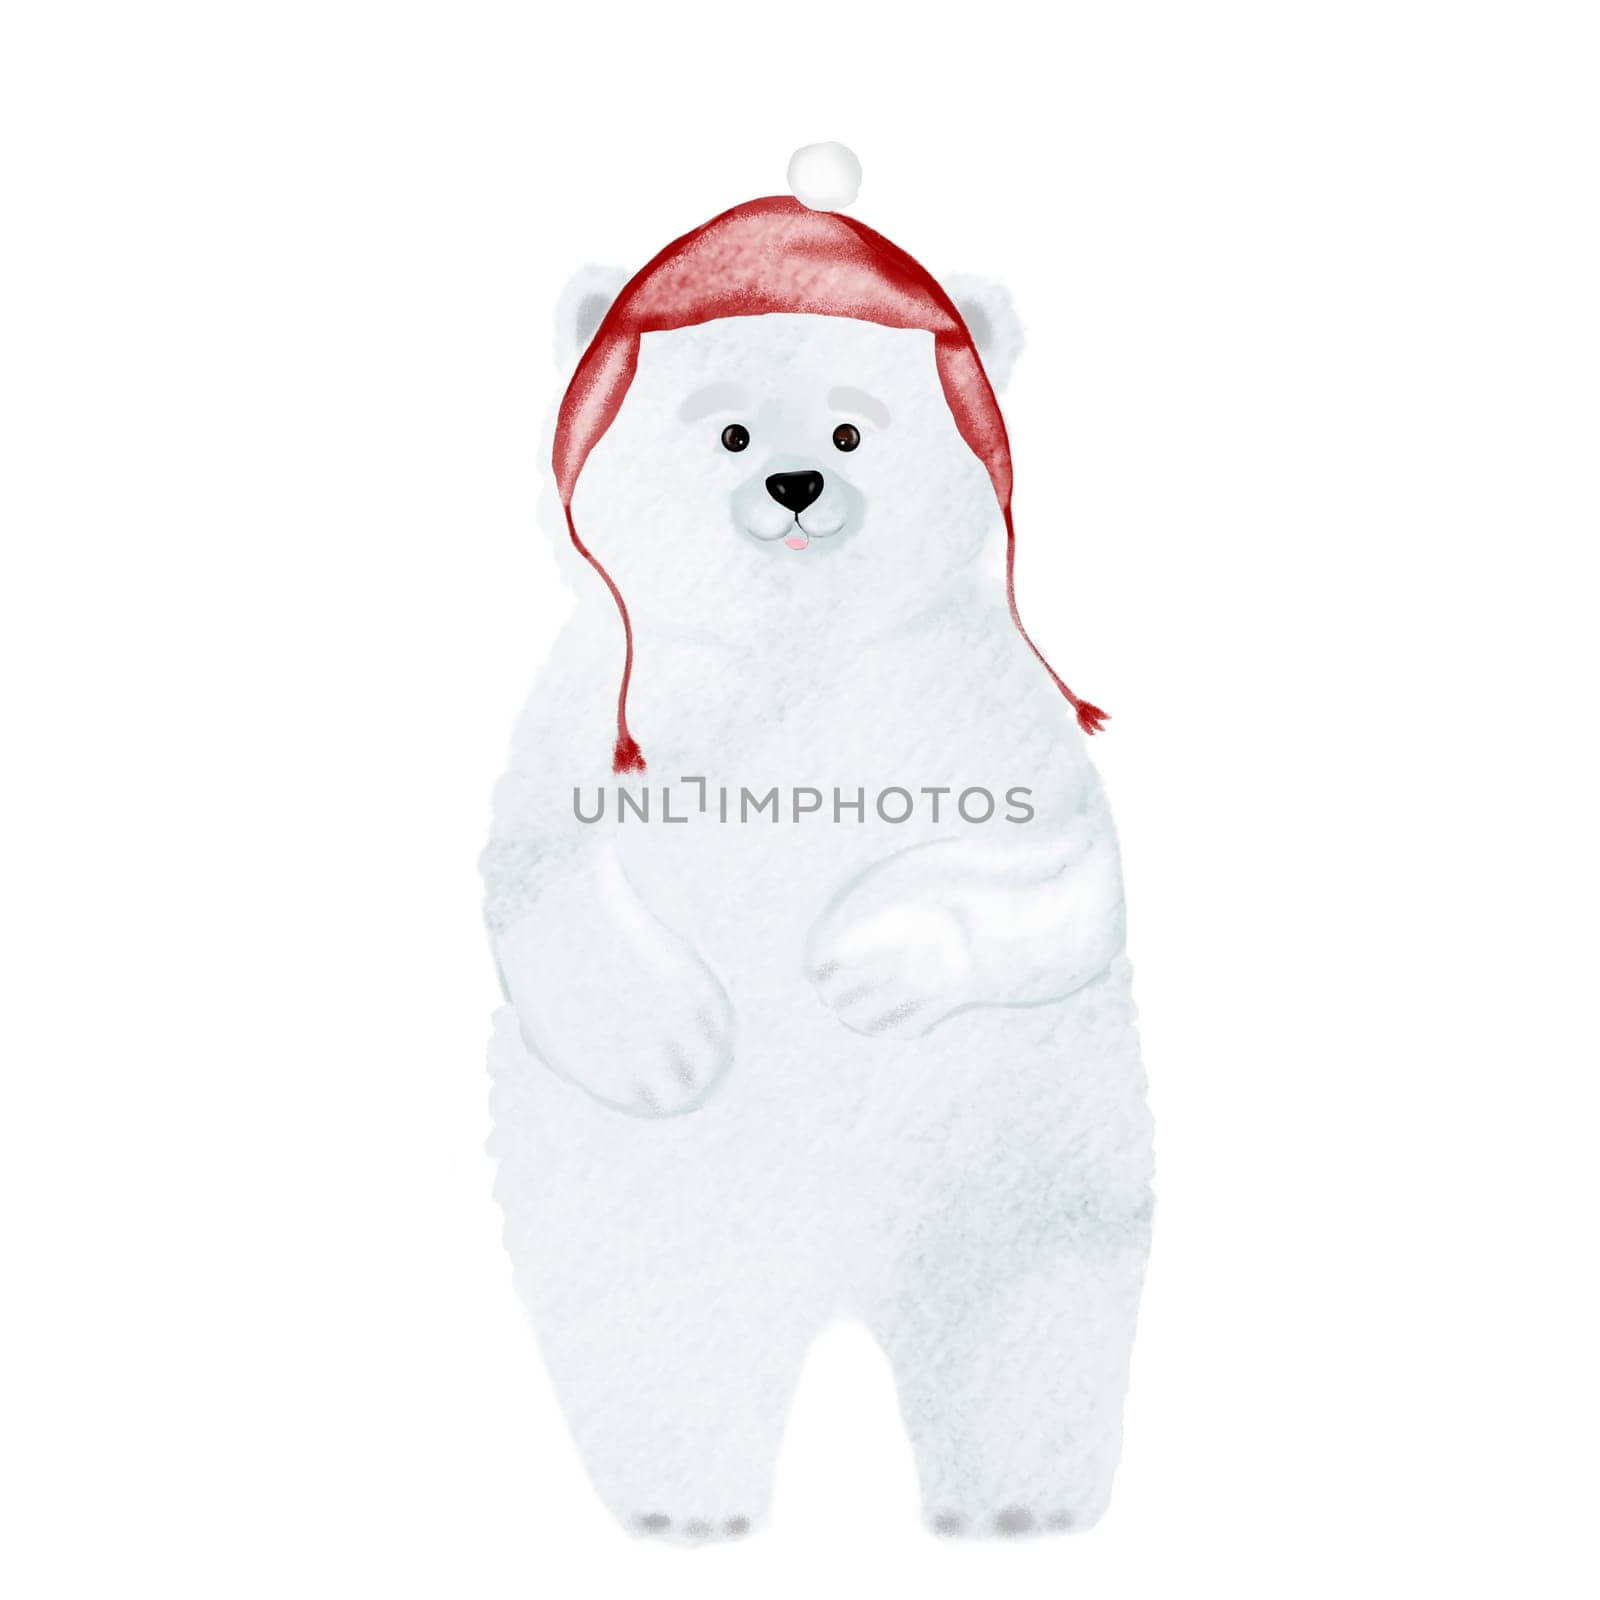 Watercolor drawing of a white polar bear baby. Cute animal northern cub in a red cap isolate on a white background. For printing on T-shirts and pillows. High quality photo